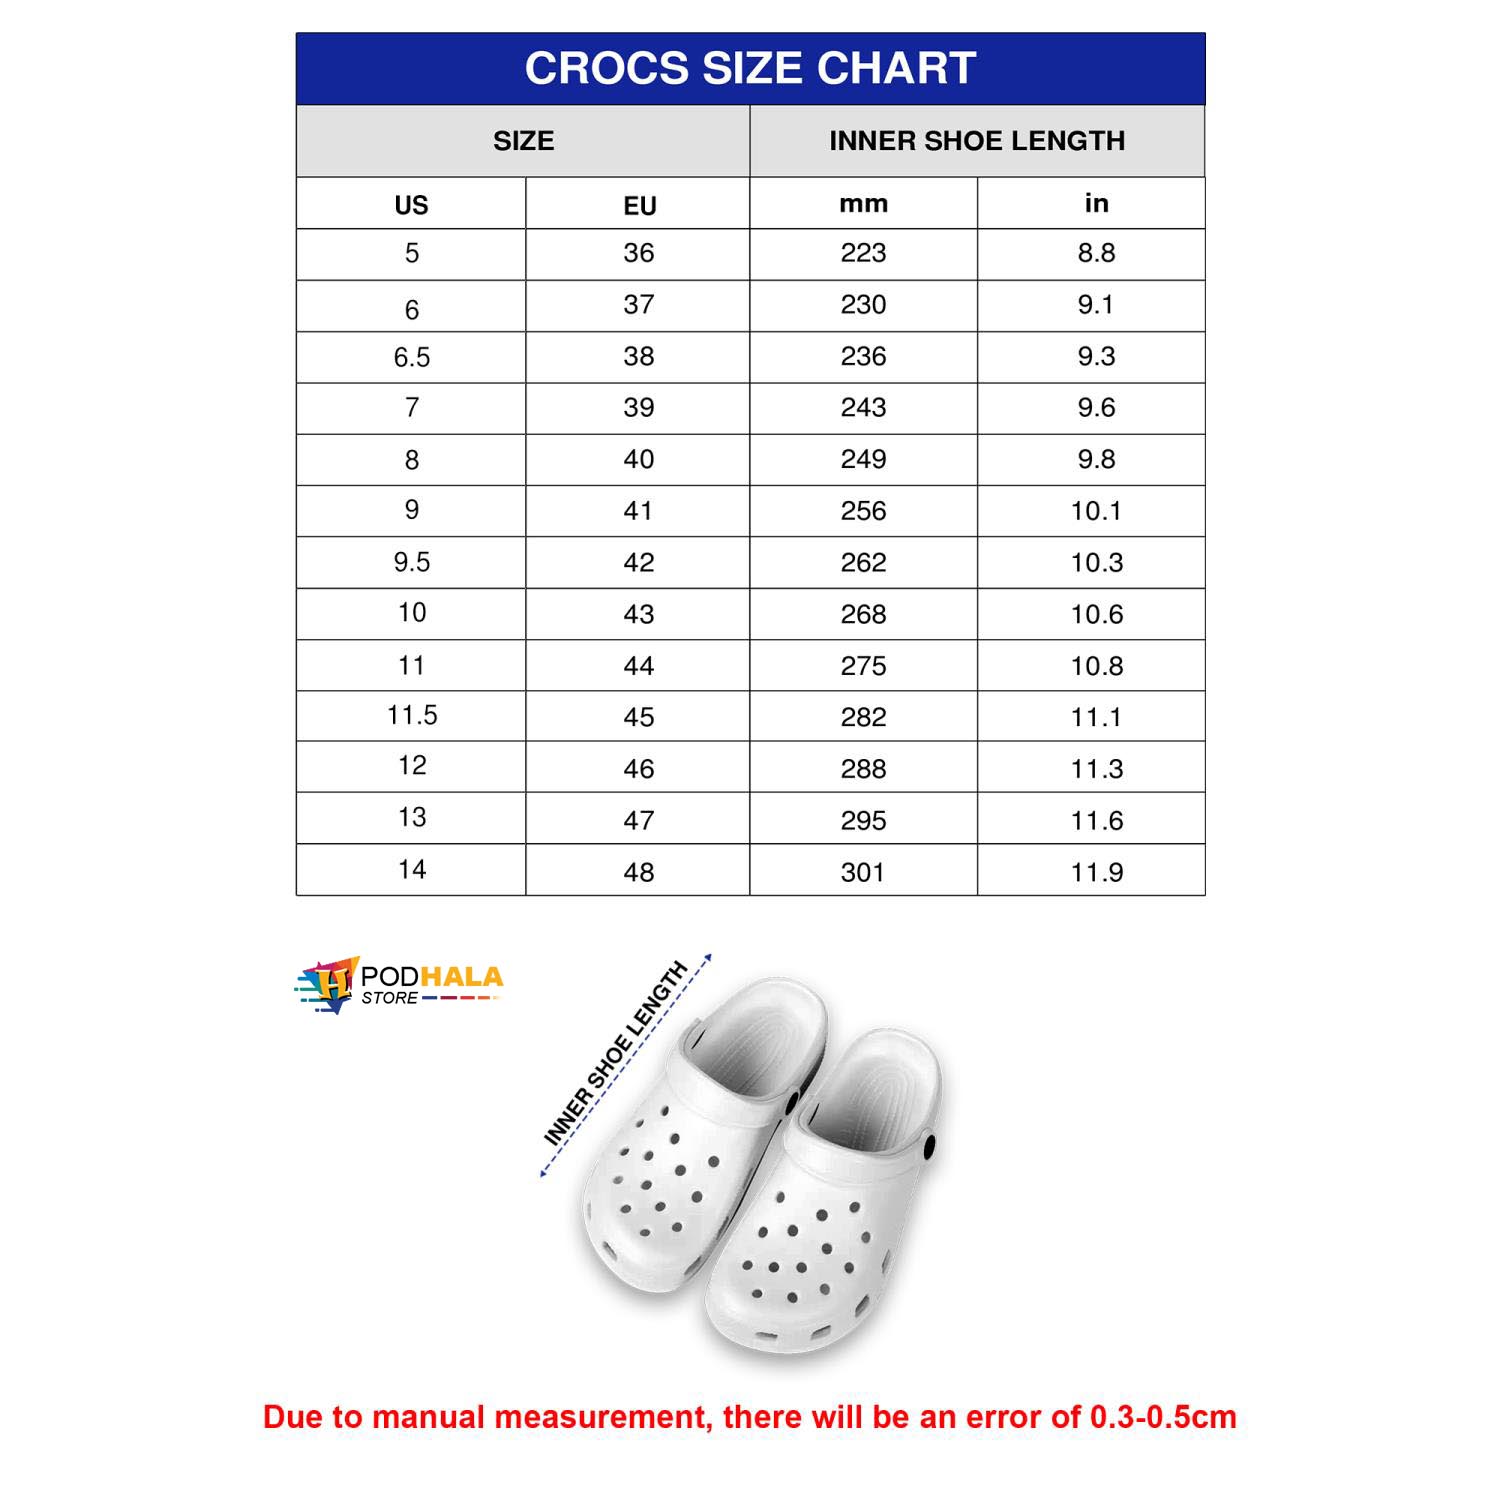 Camping Vans Classic Clogs Unisex Fashion Style Crocs Clog Shoes - Bring Ideas, Thoughts Imaginations Into Reality Today